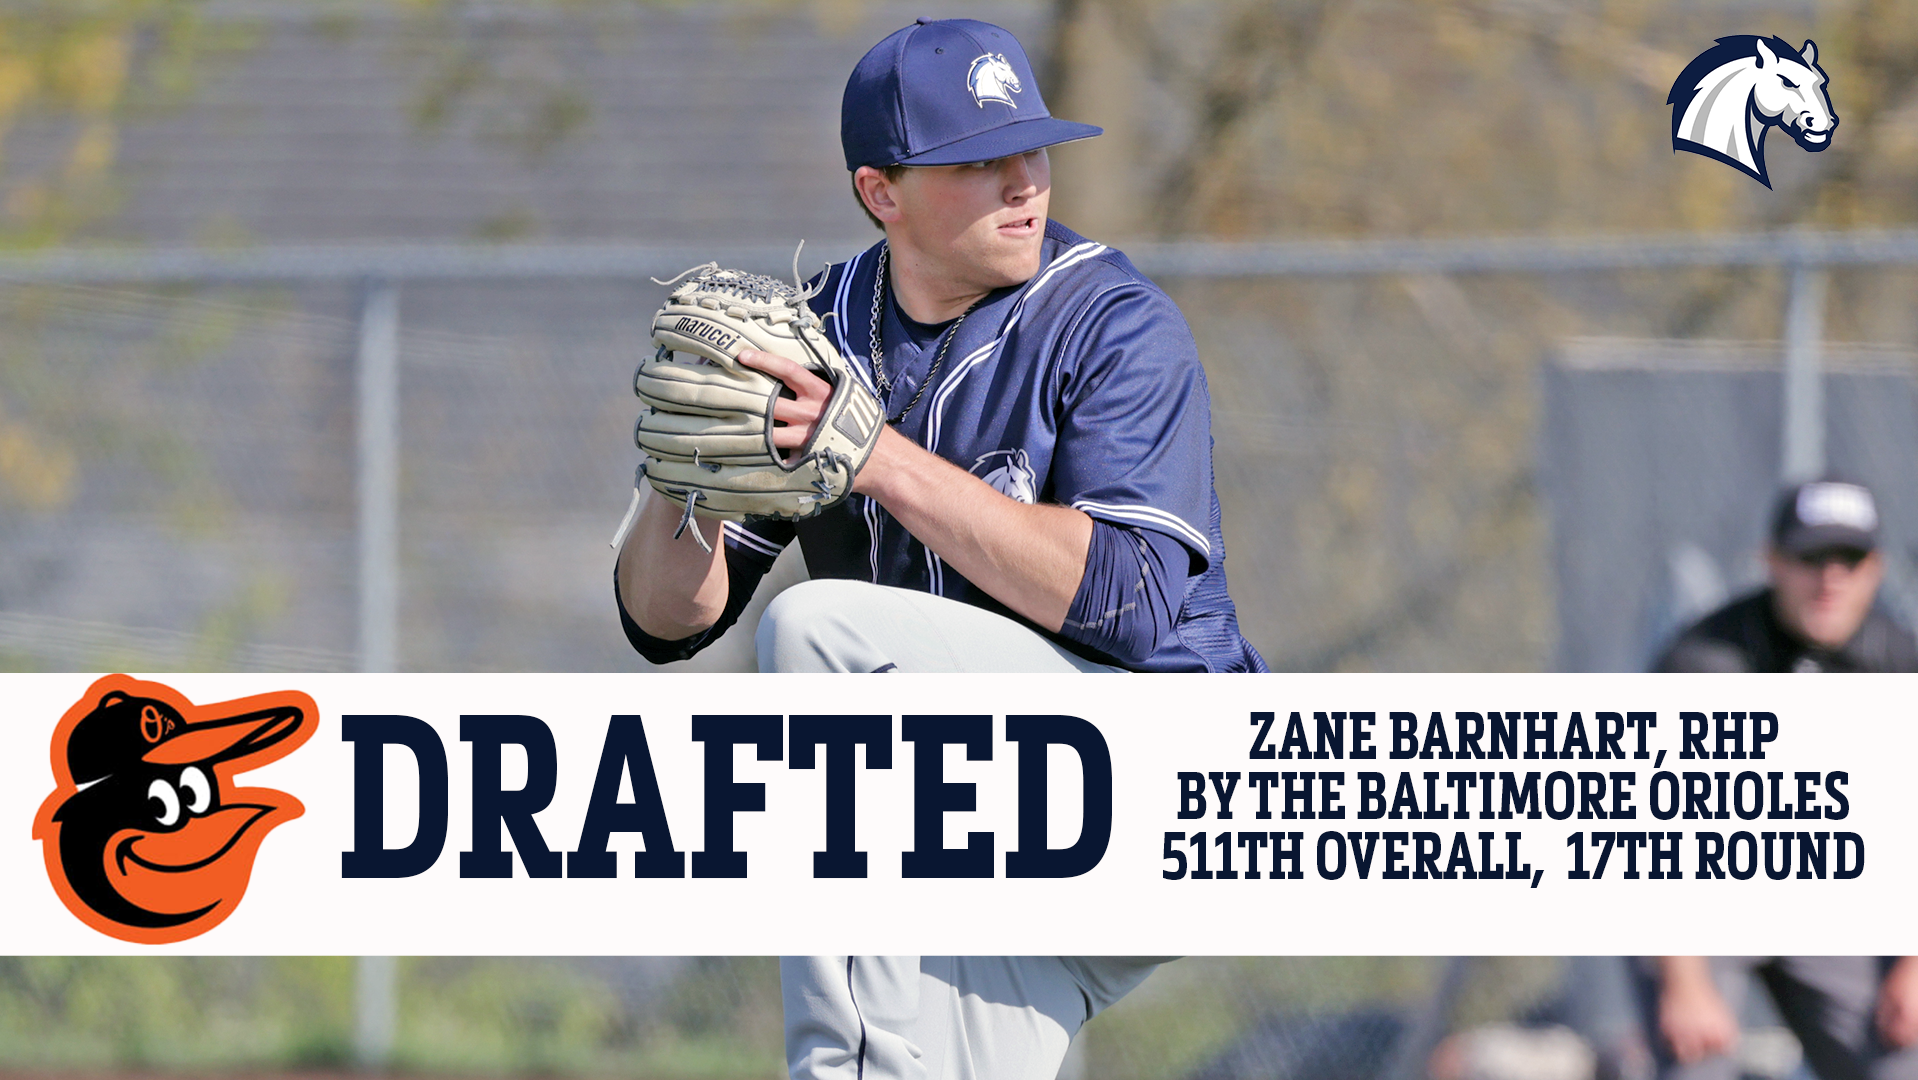 DRAFTED: Zane Barnhart picked by Baltimore Orioles in 17th round of 2023 MLB Draft